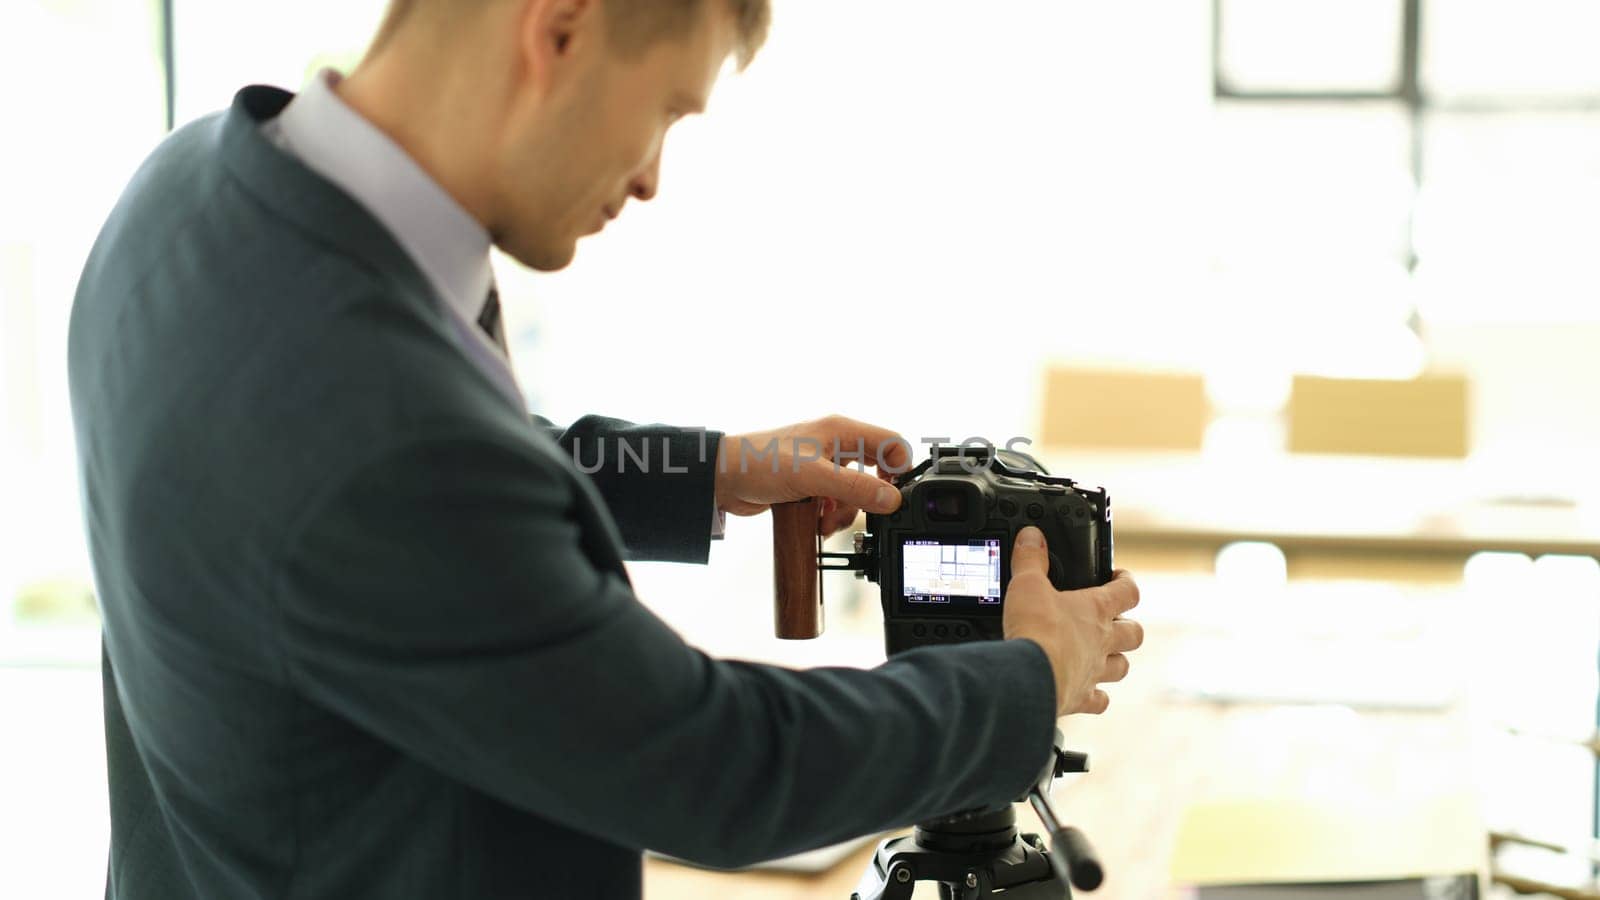 Business coach in suit adjusting camera to audience closeup. Business blogging concept